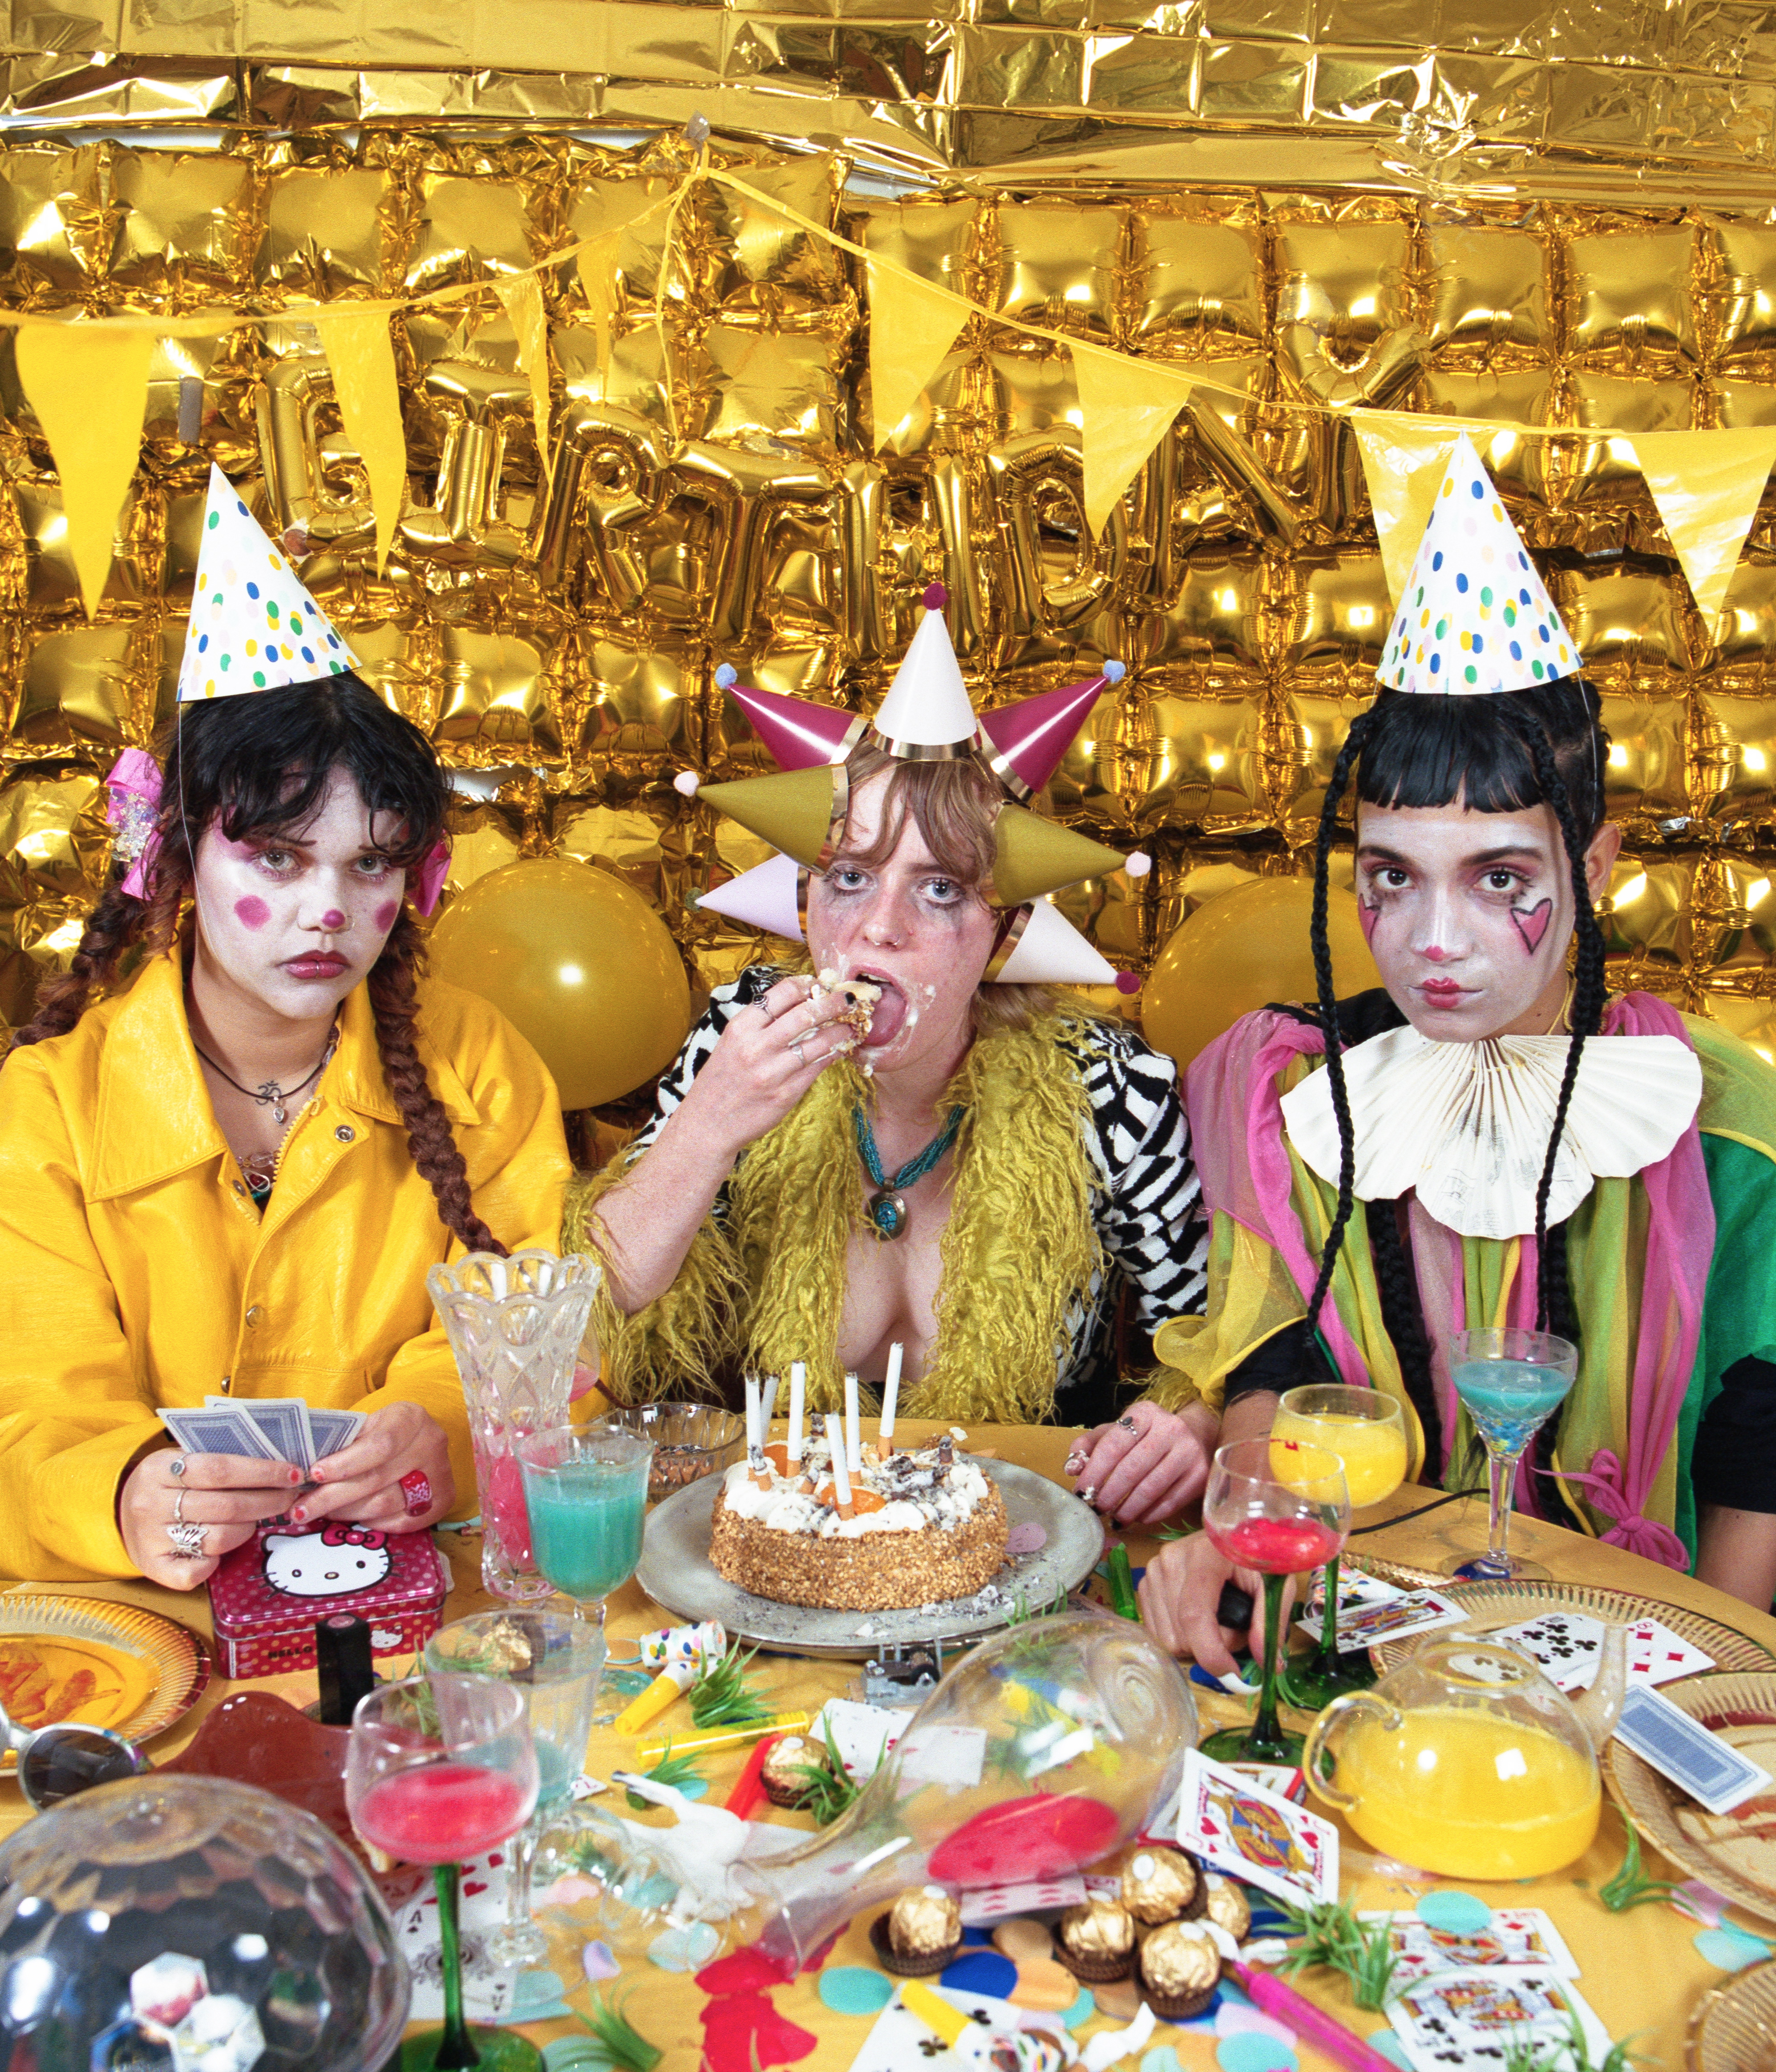 Flo Verhulst – three young people  sitting a table full of stuff, wearing party hats and clown makeup with decorations everywhere in the background. In the middle, flo is eating cake